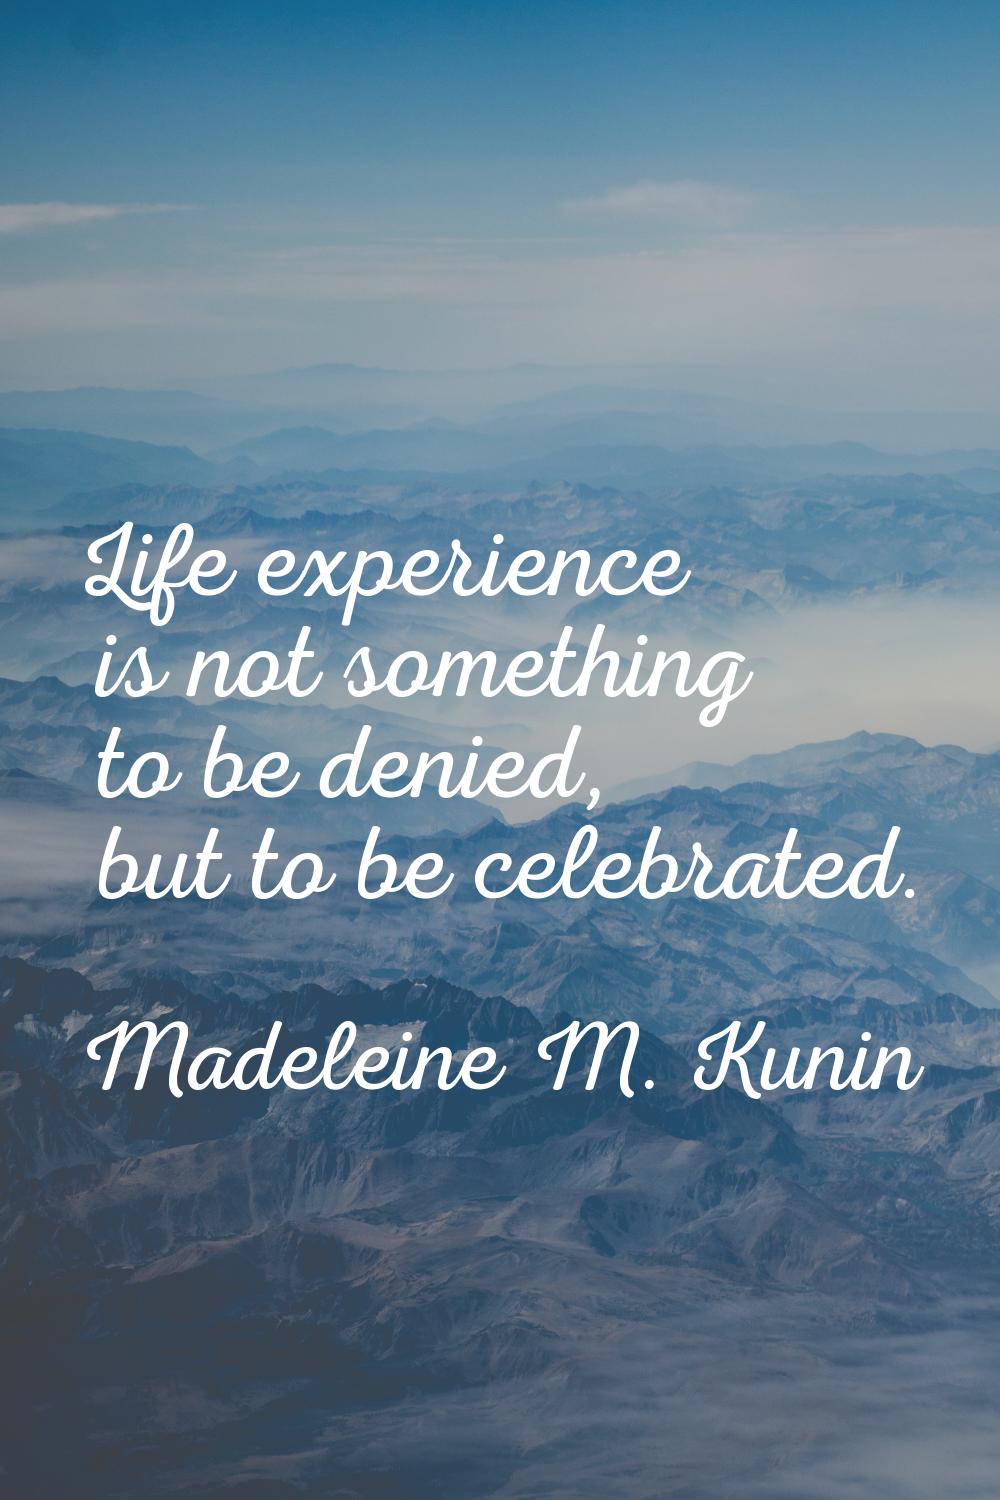 Life experience is not something to be denied, but to be celebrated.